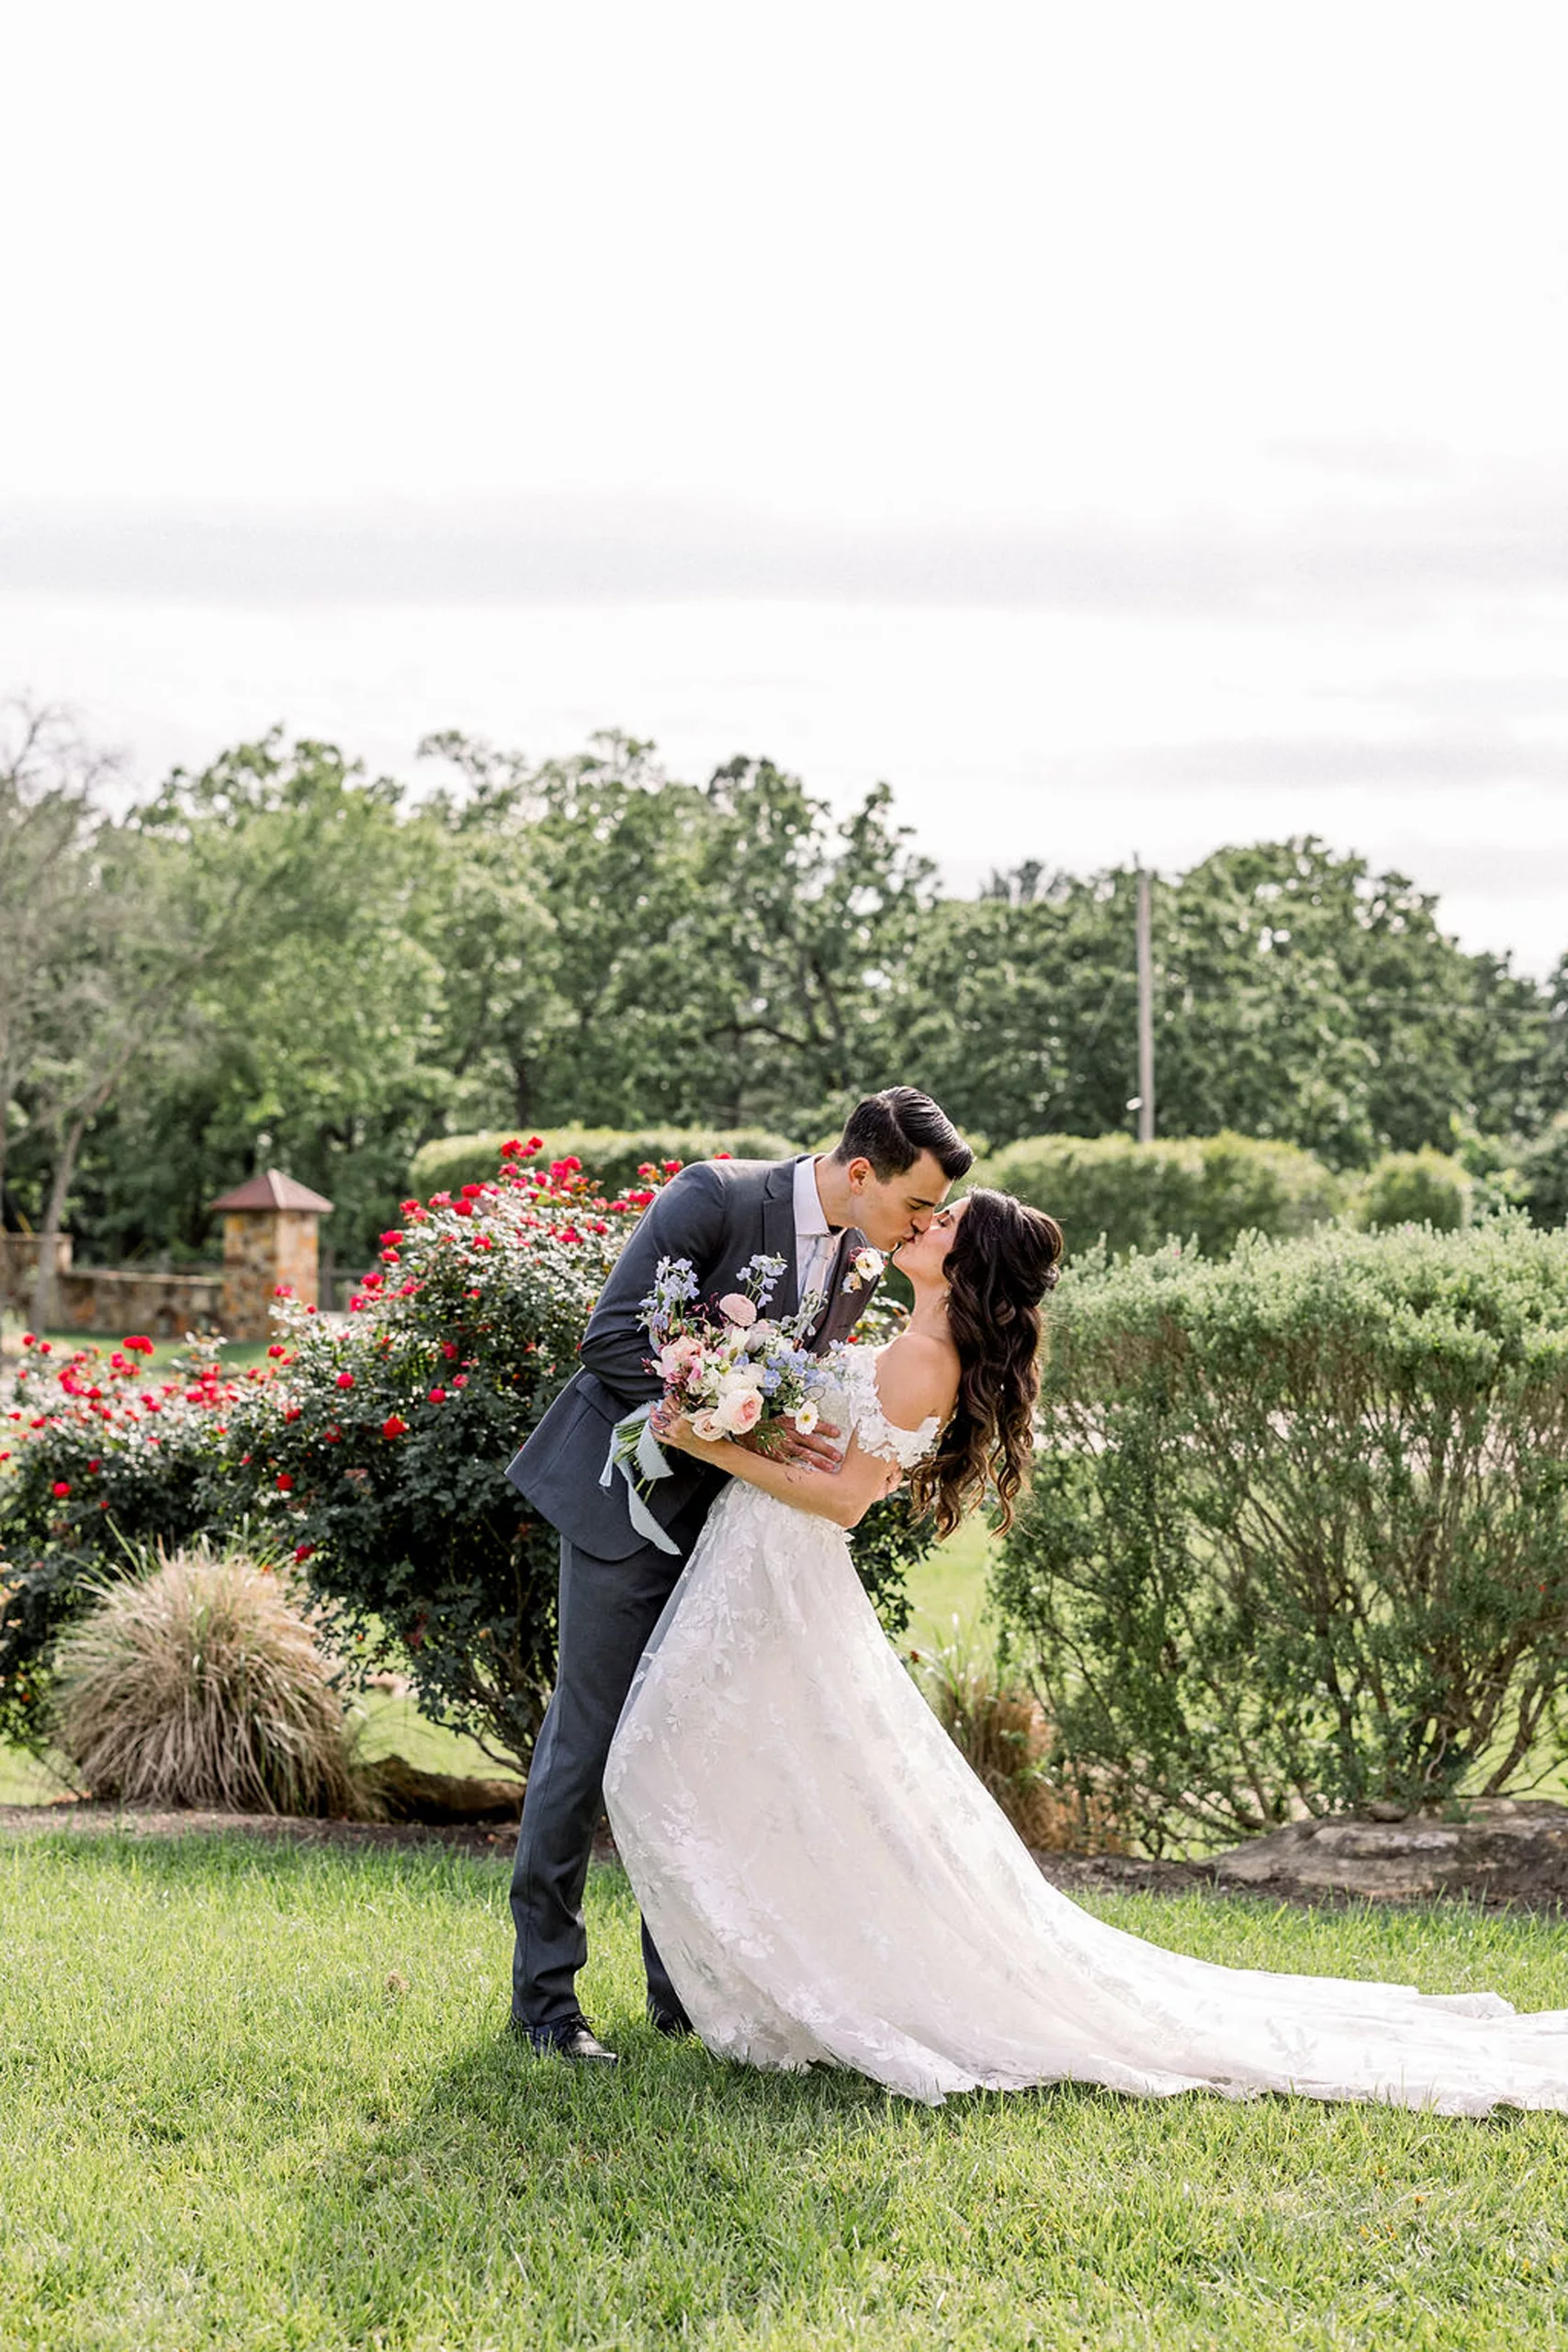 A groom dips and kisses his bride in a white lace dress in the iron manor wedding venue rose garden